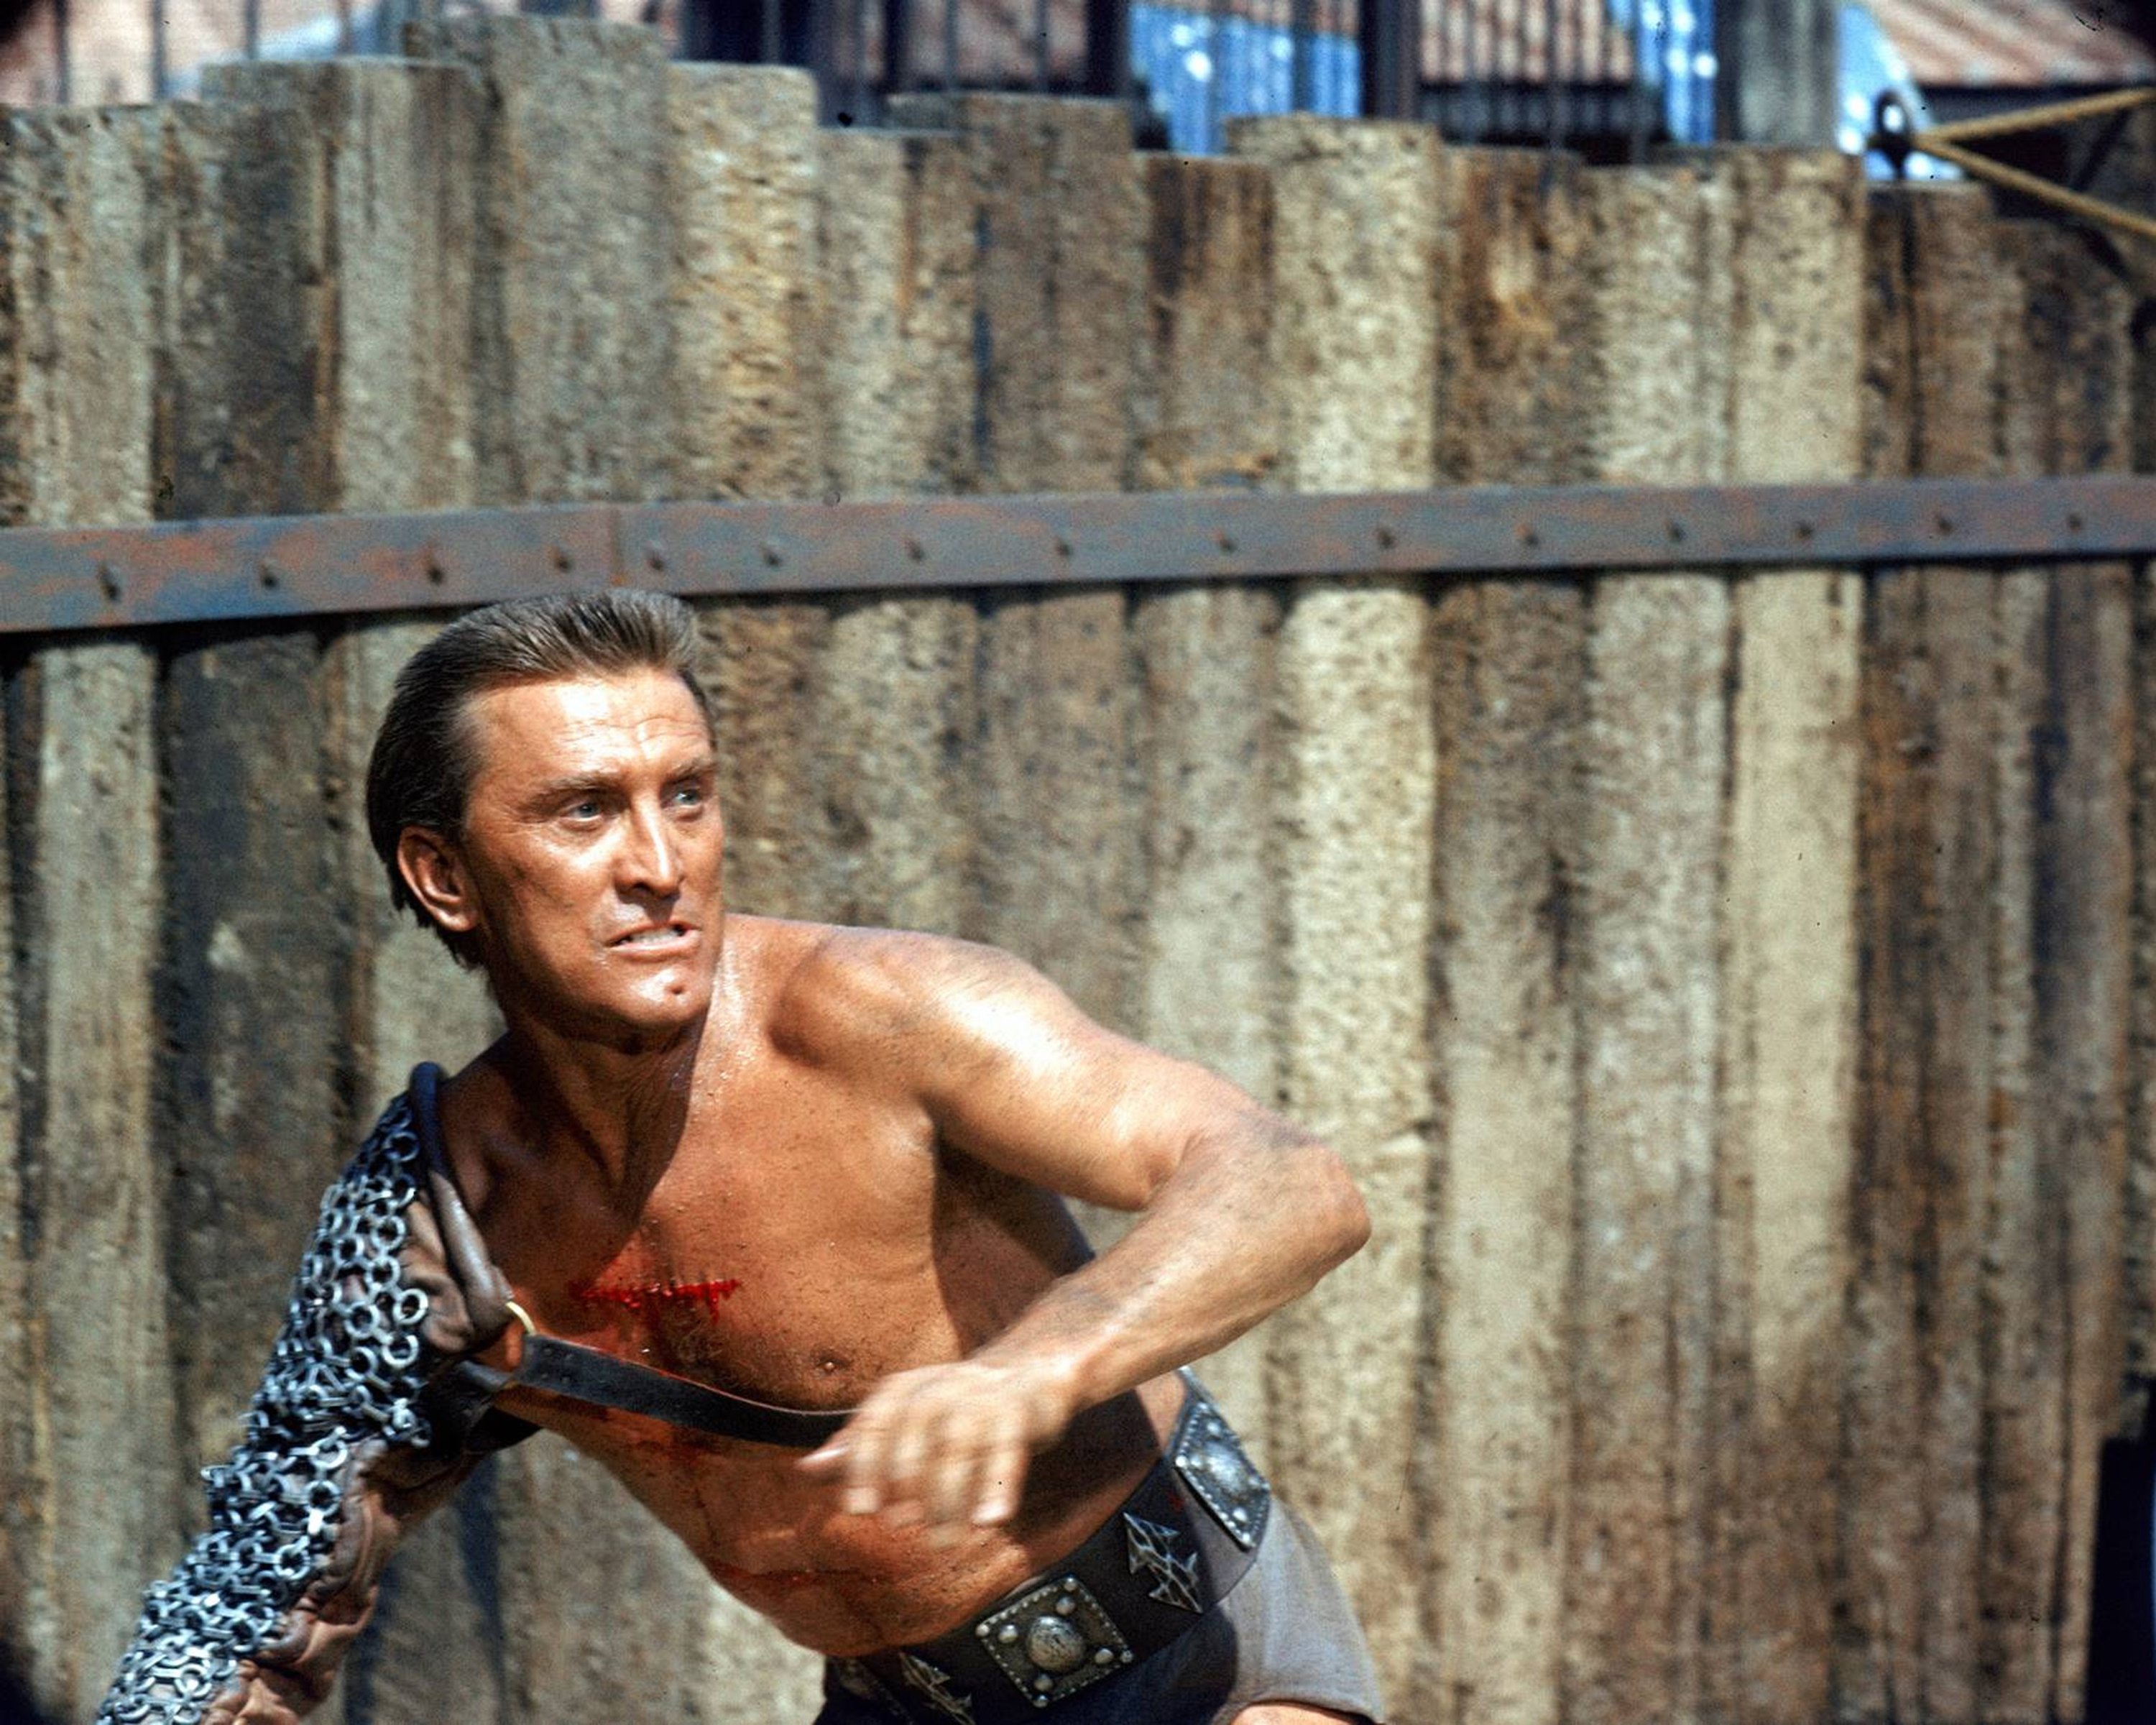 Kirk Douglas in a publicity still issued for the film, 'Spartacus', 1960. | Source: Getty Images.